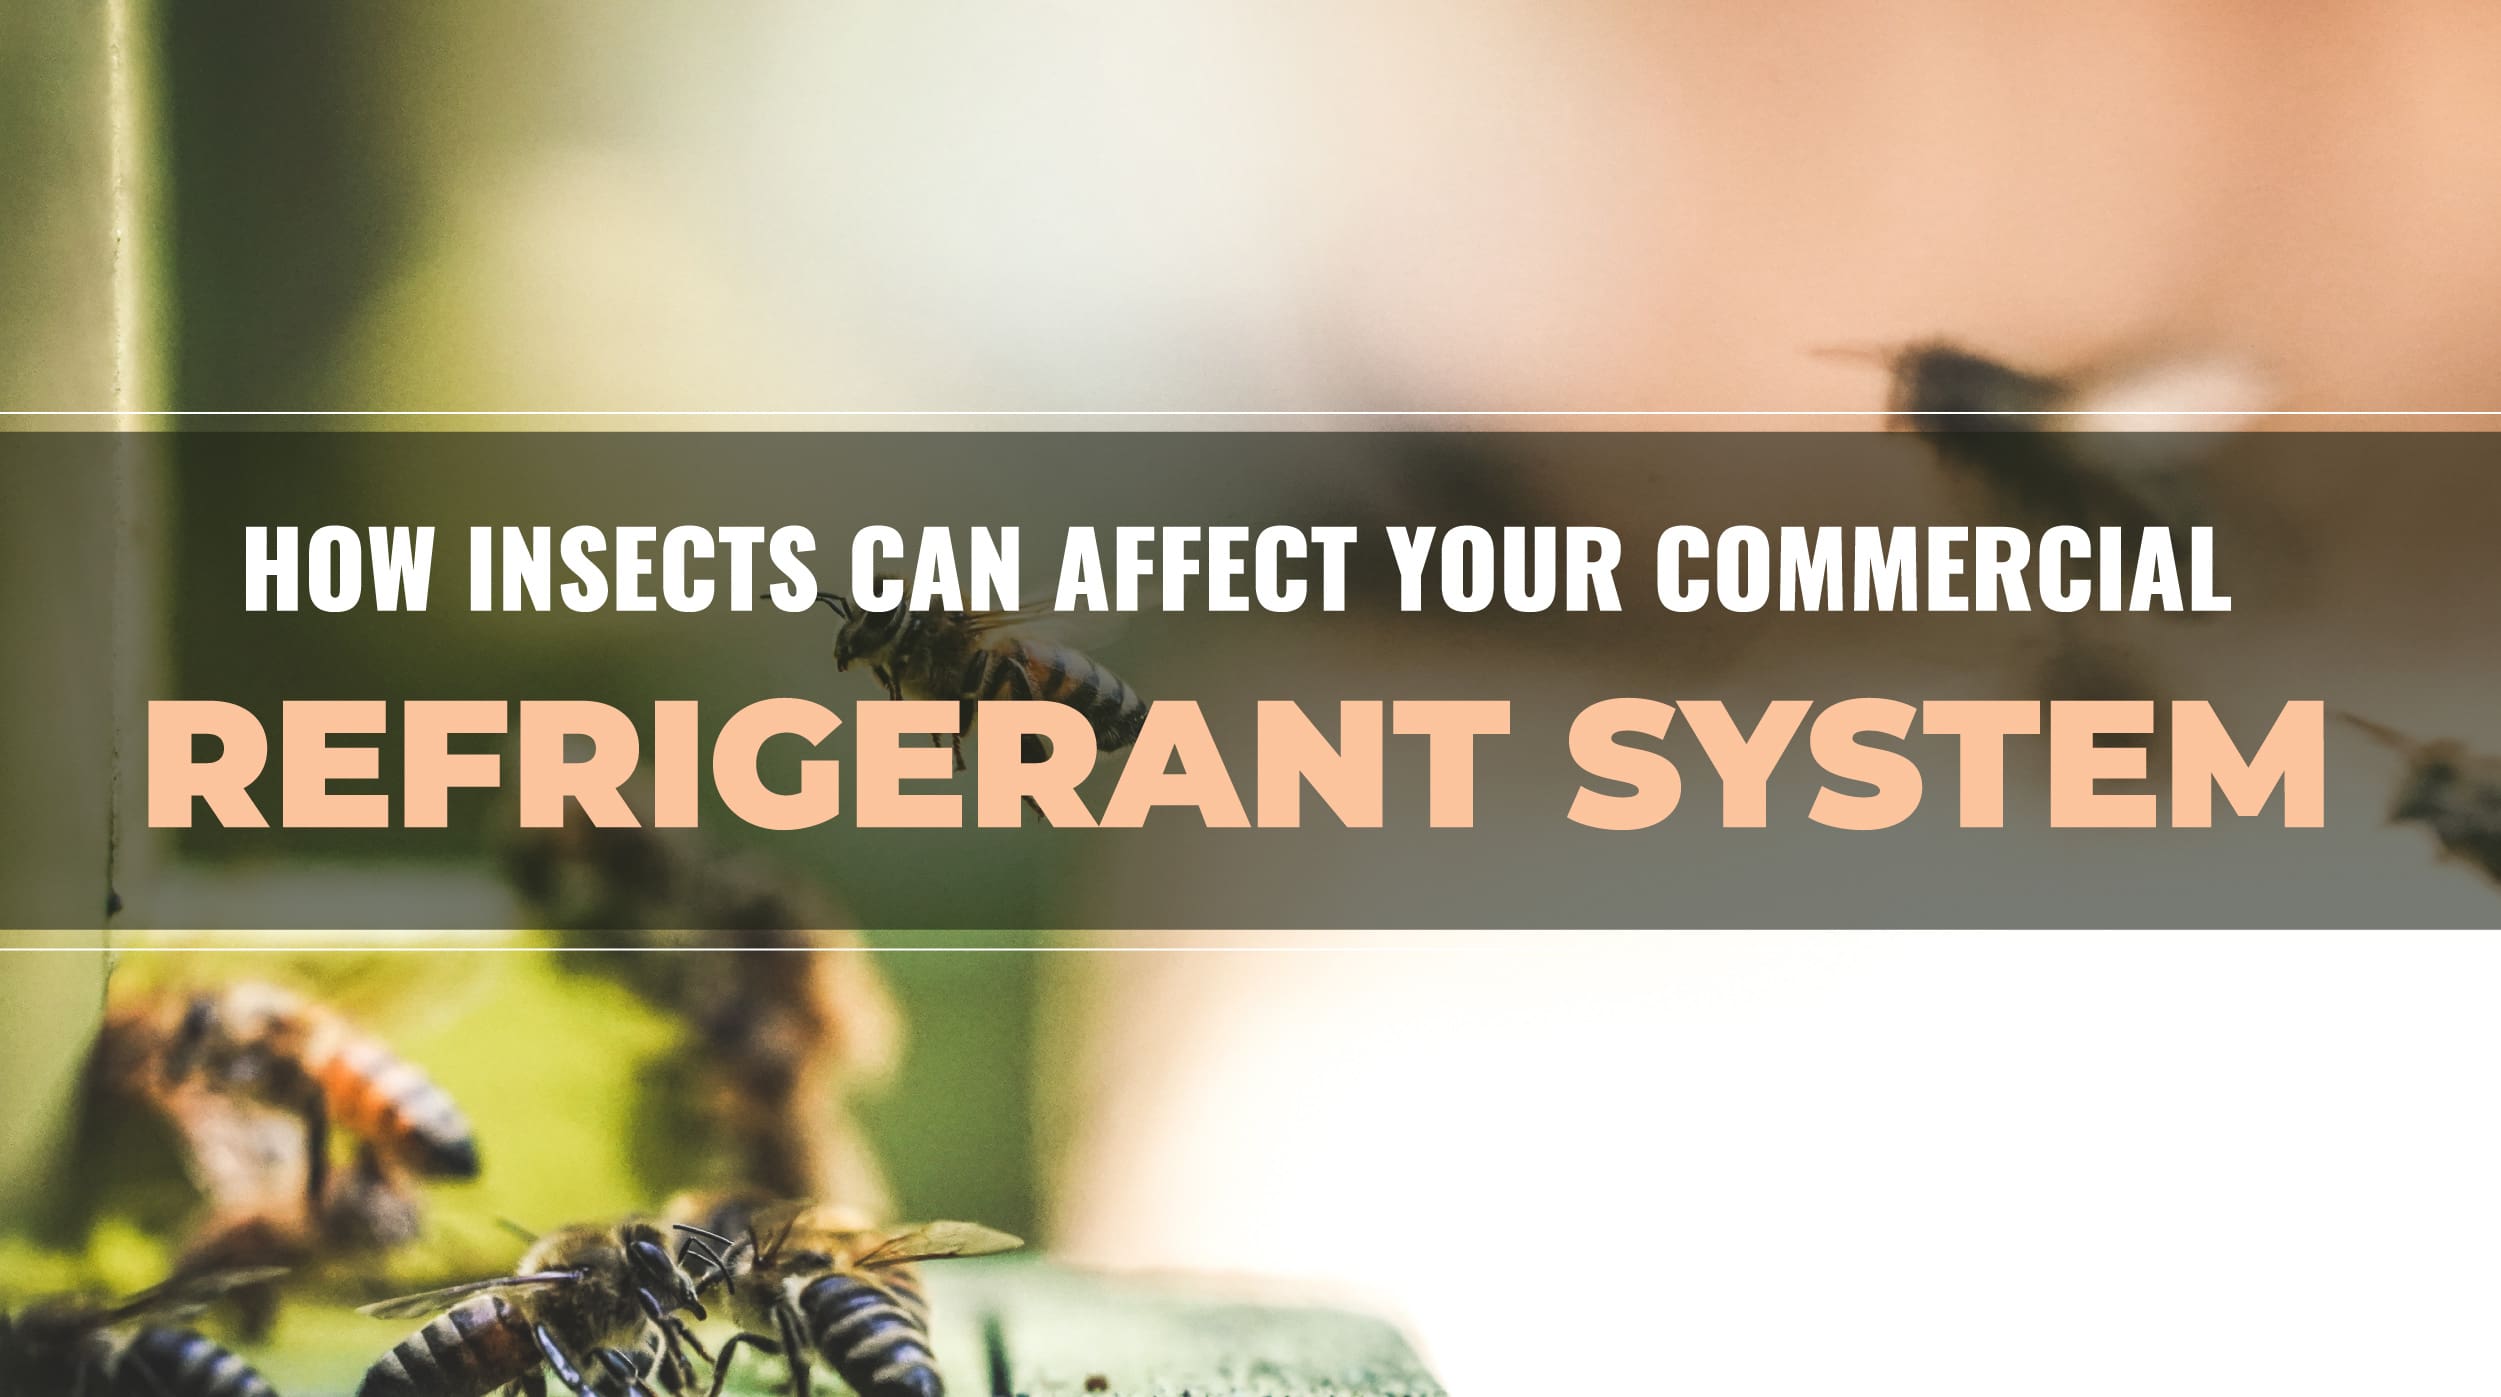 How Insects Can Affect Your Commercial Refrigerant System